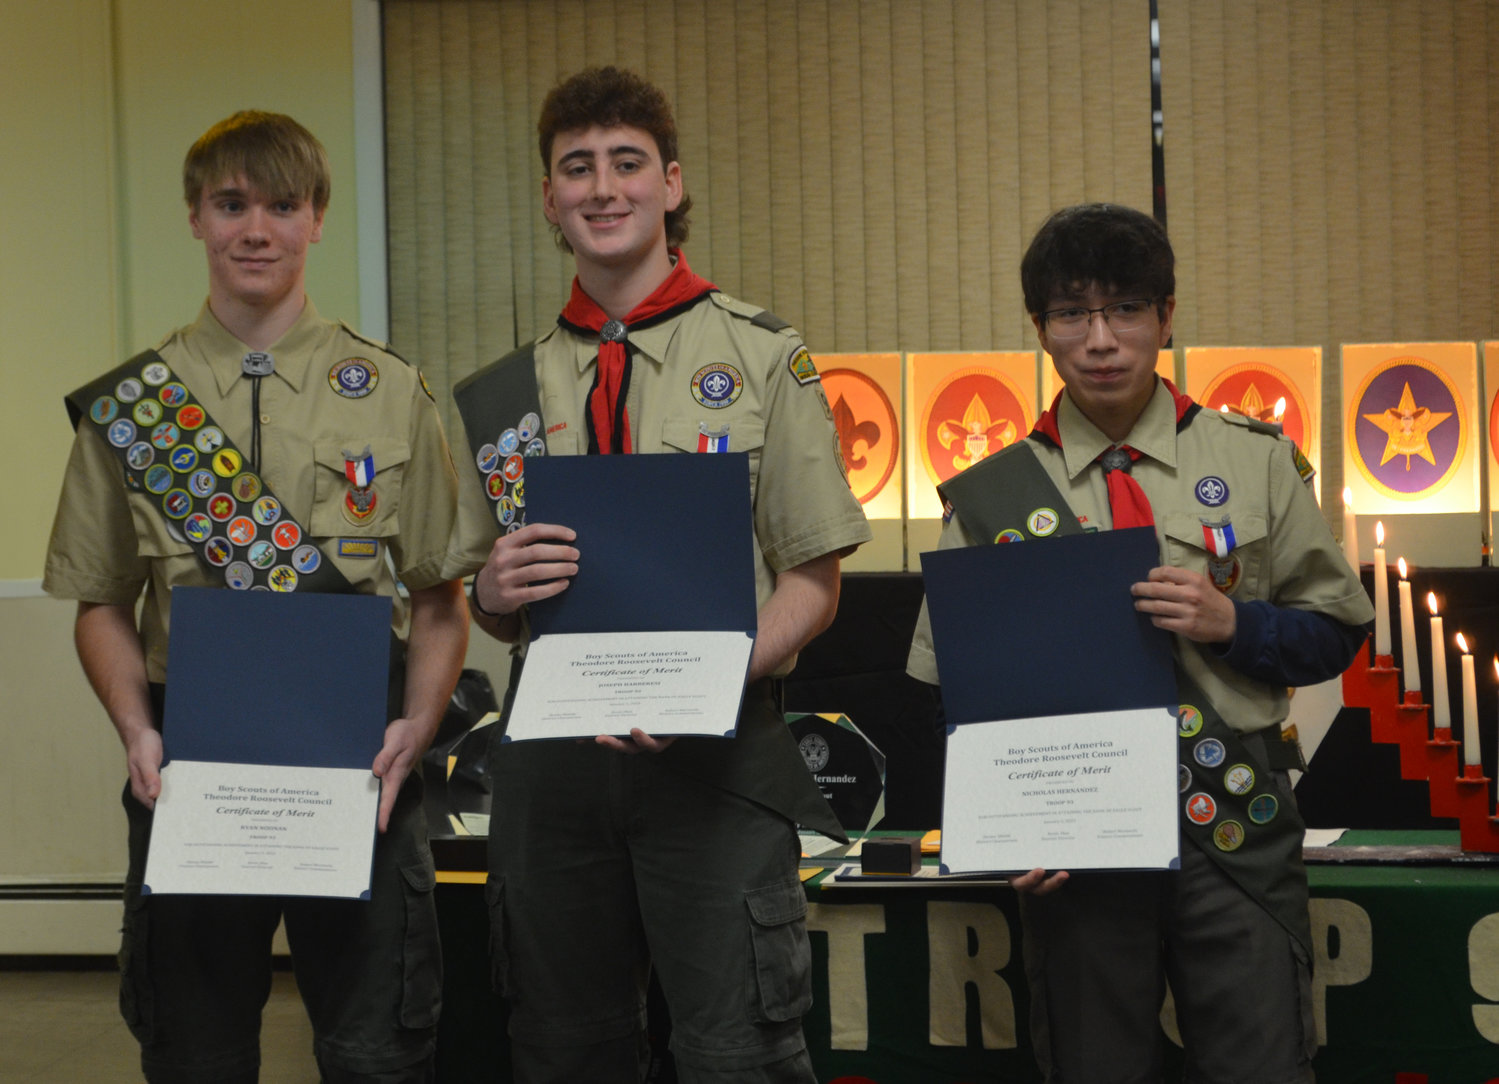 Ryan Noonan, left, Joseph Barberesi and Nicholas Hernandez were celebrated for their Eagle achievement at a Court of Honor ceremony on Jan. 5.